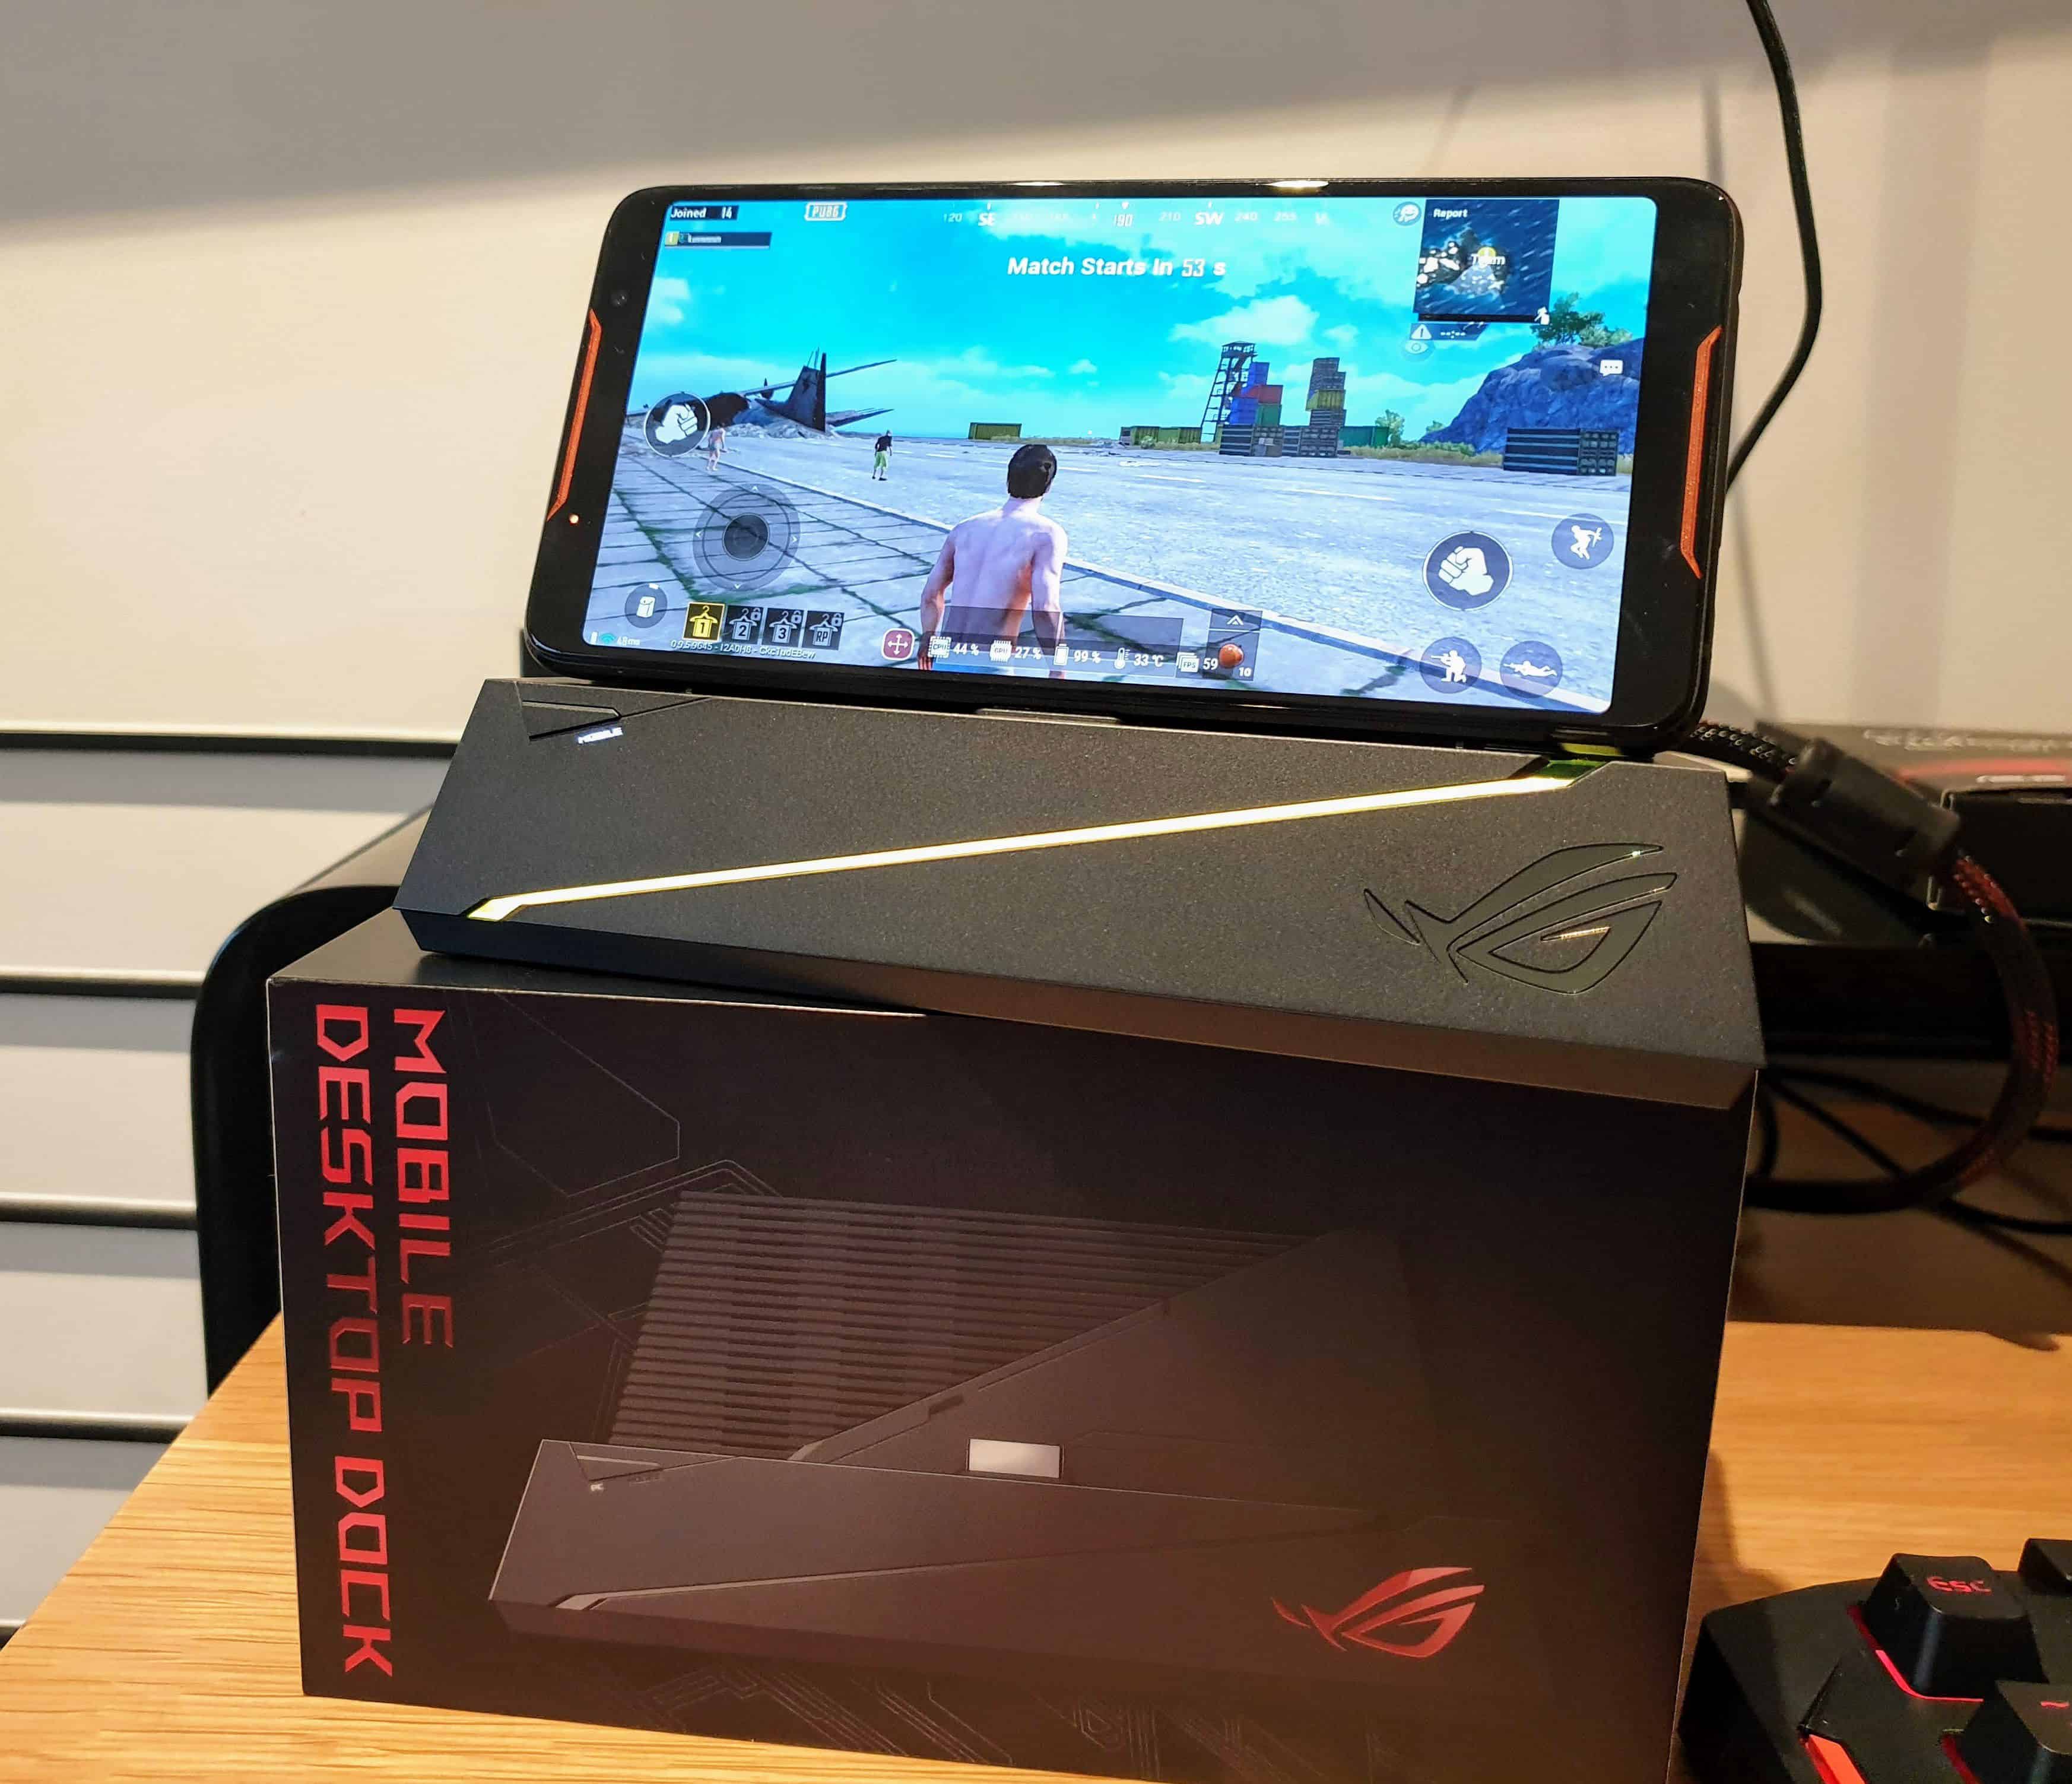 Asus ROG Phone Hands-on & First Impressions - The Real #GameChanger ? - 8